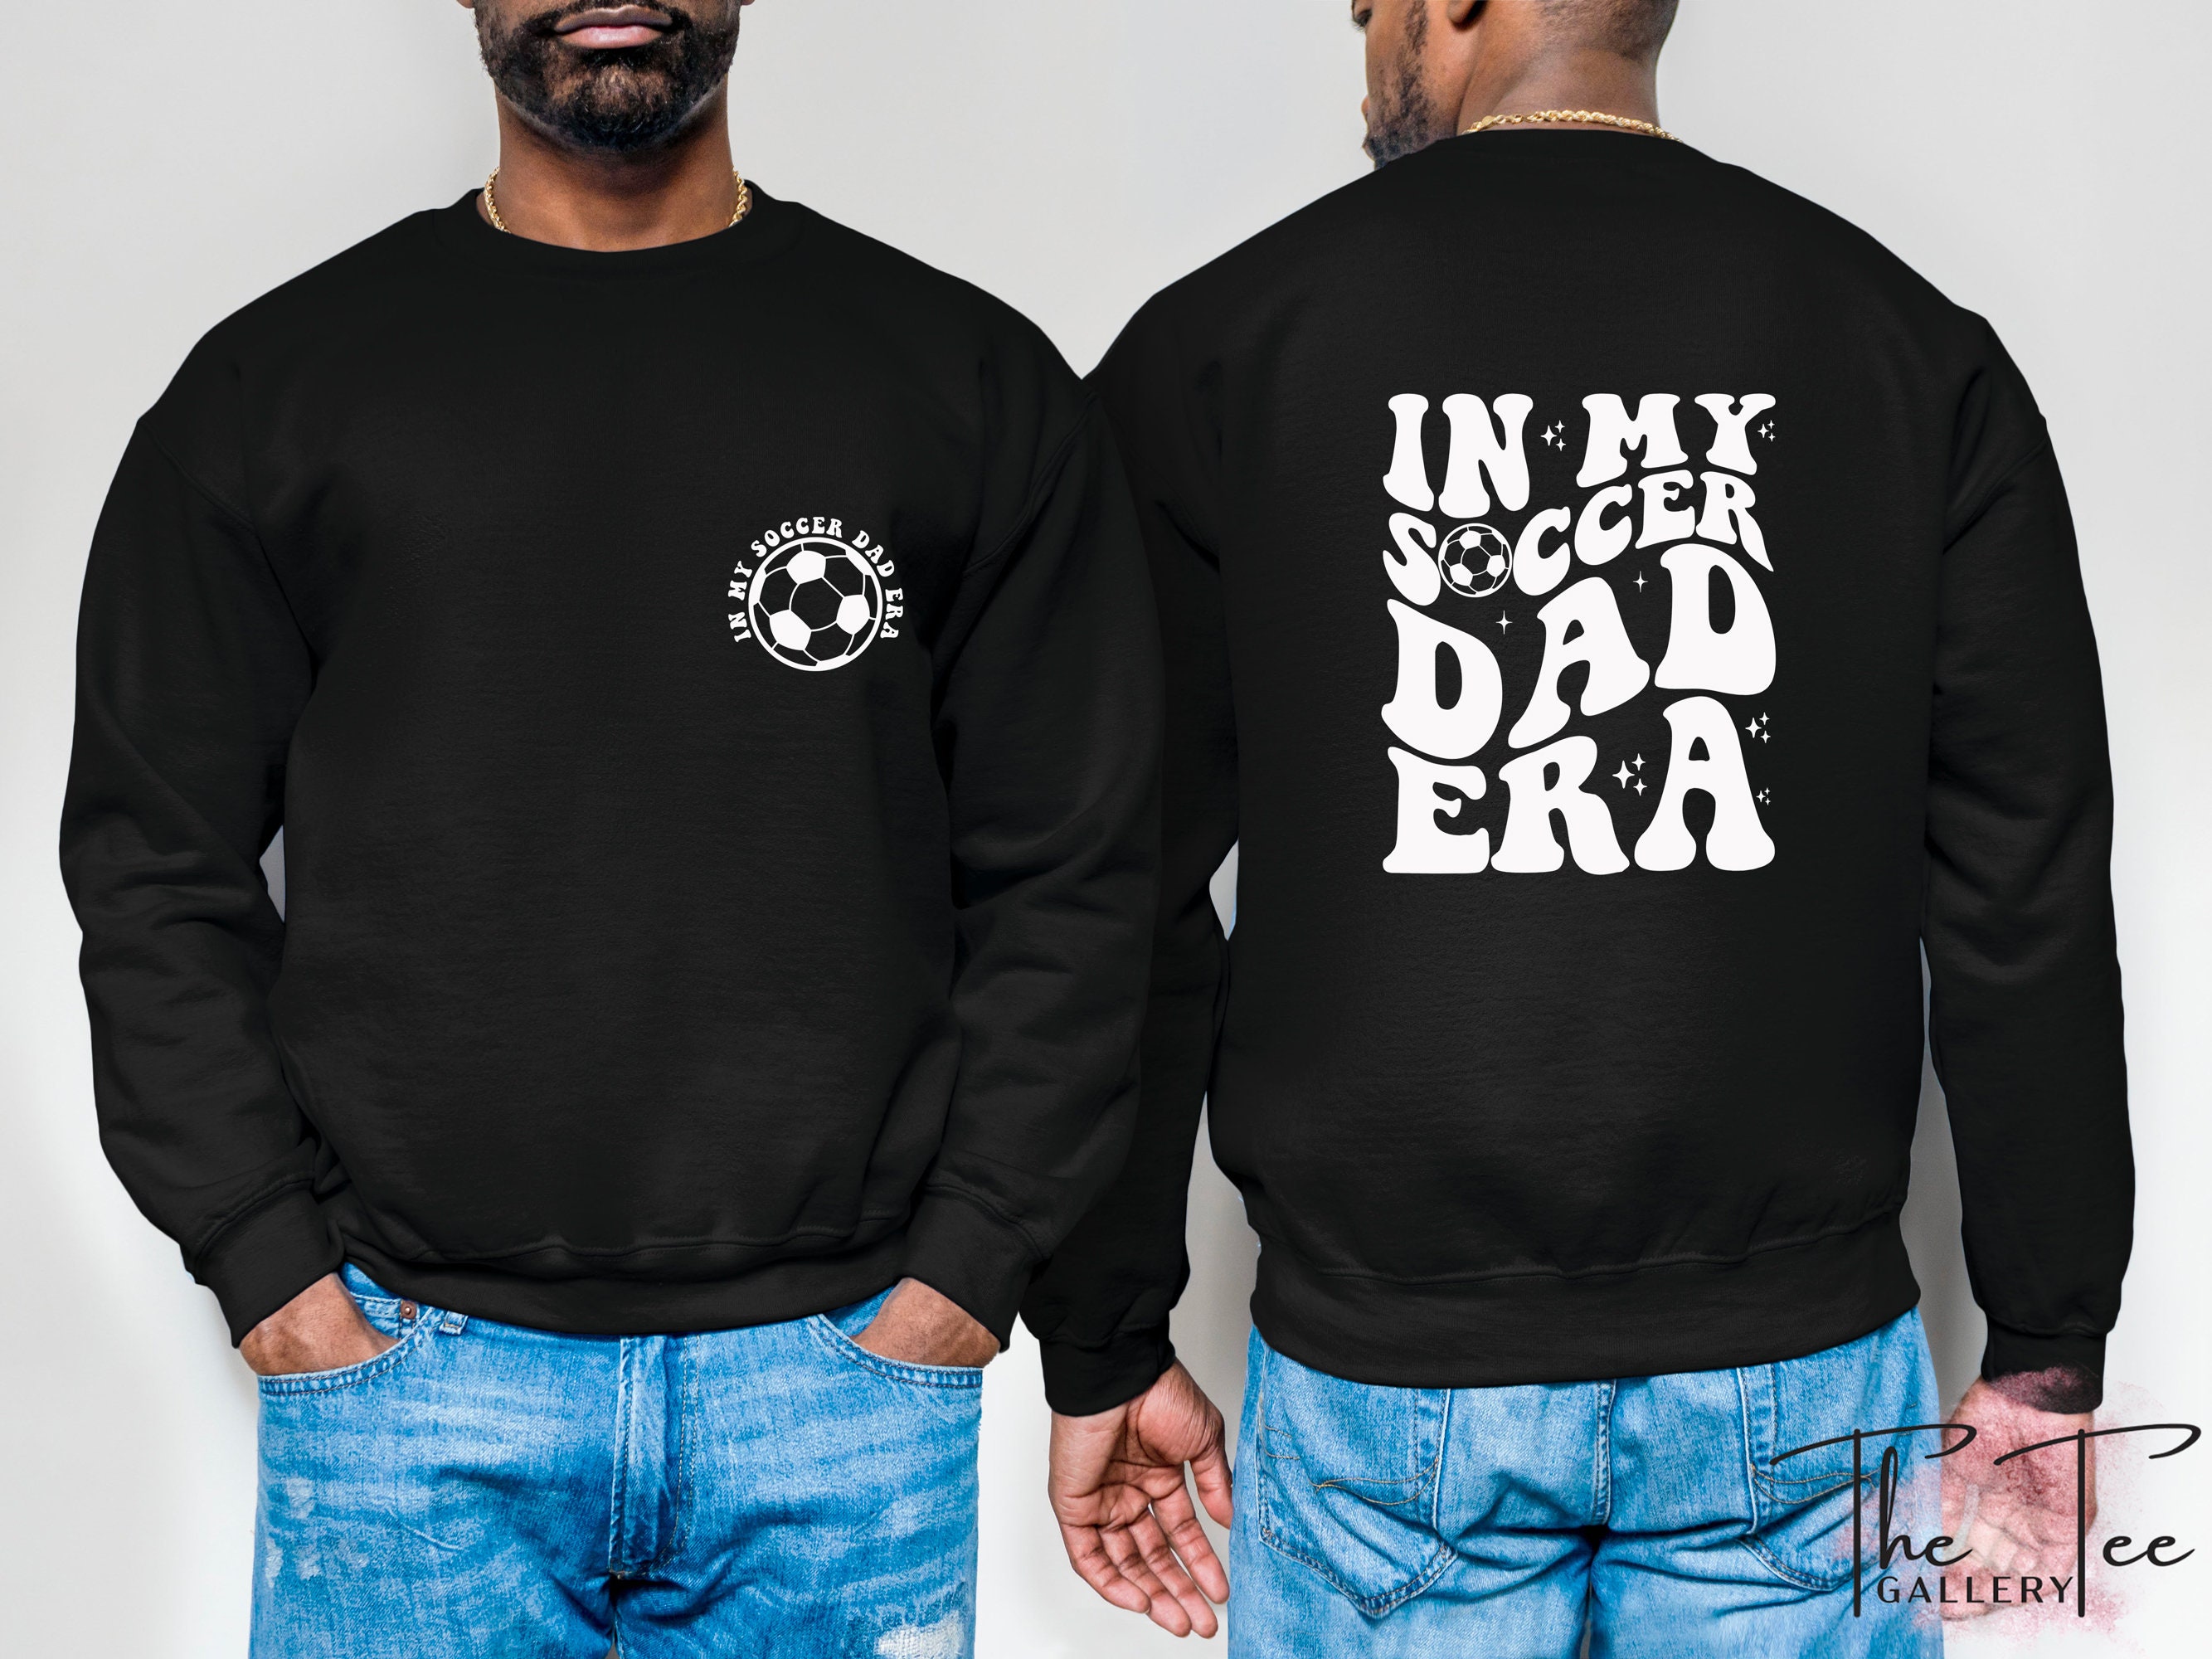 Discover In My Soccer Dad Era Double Sided Sweatshirts, Funny Dad Double Sided Sweatshirts